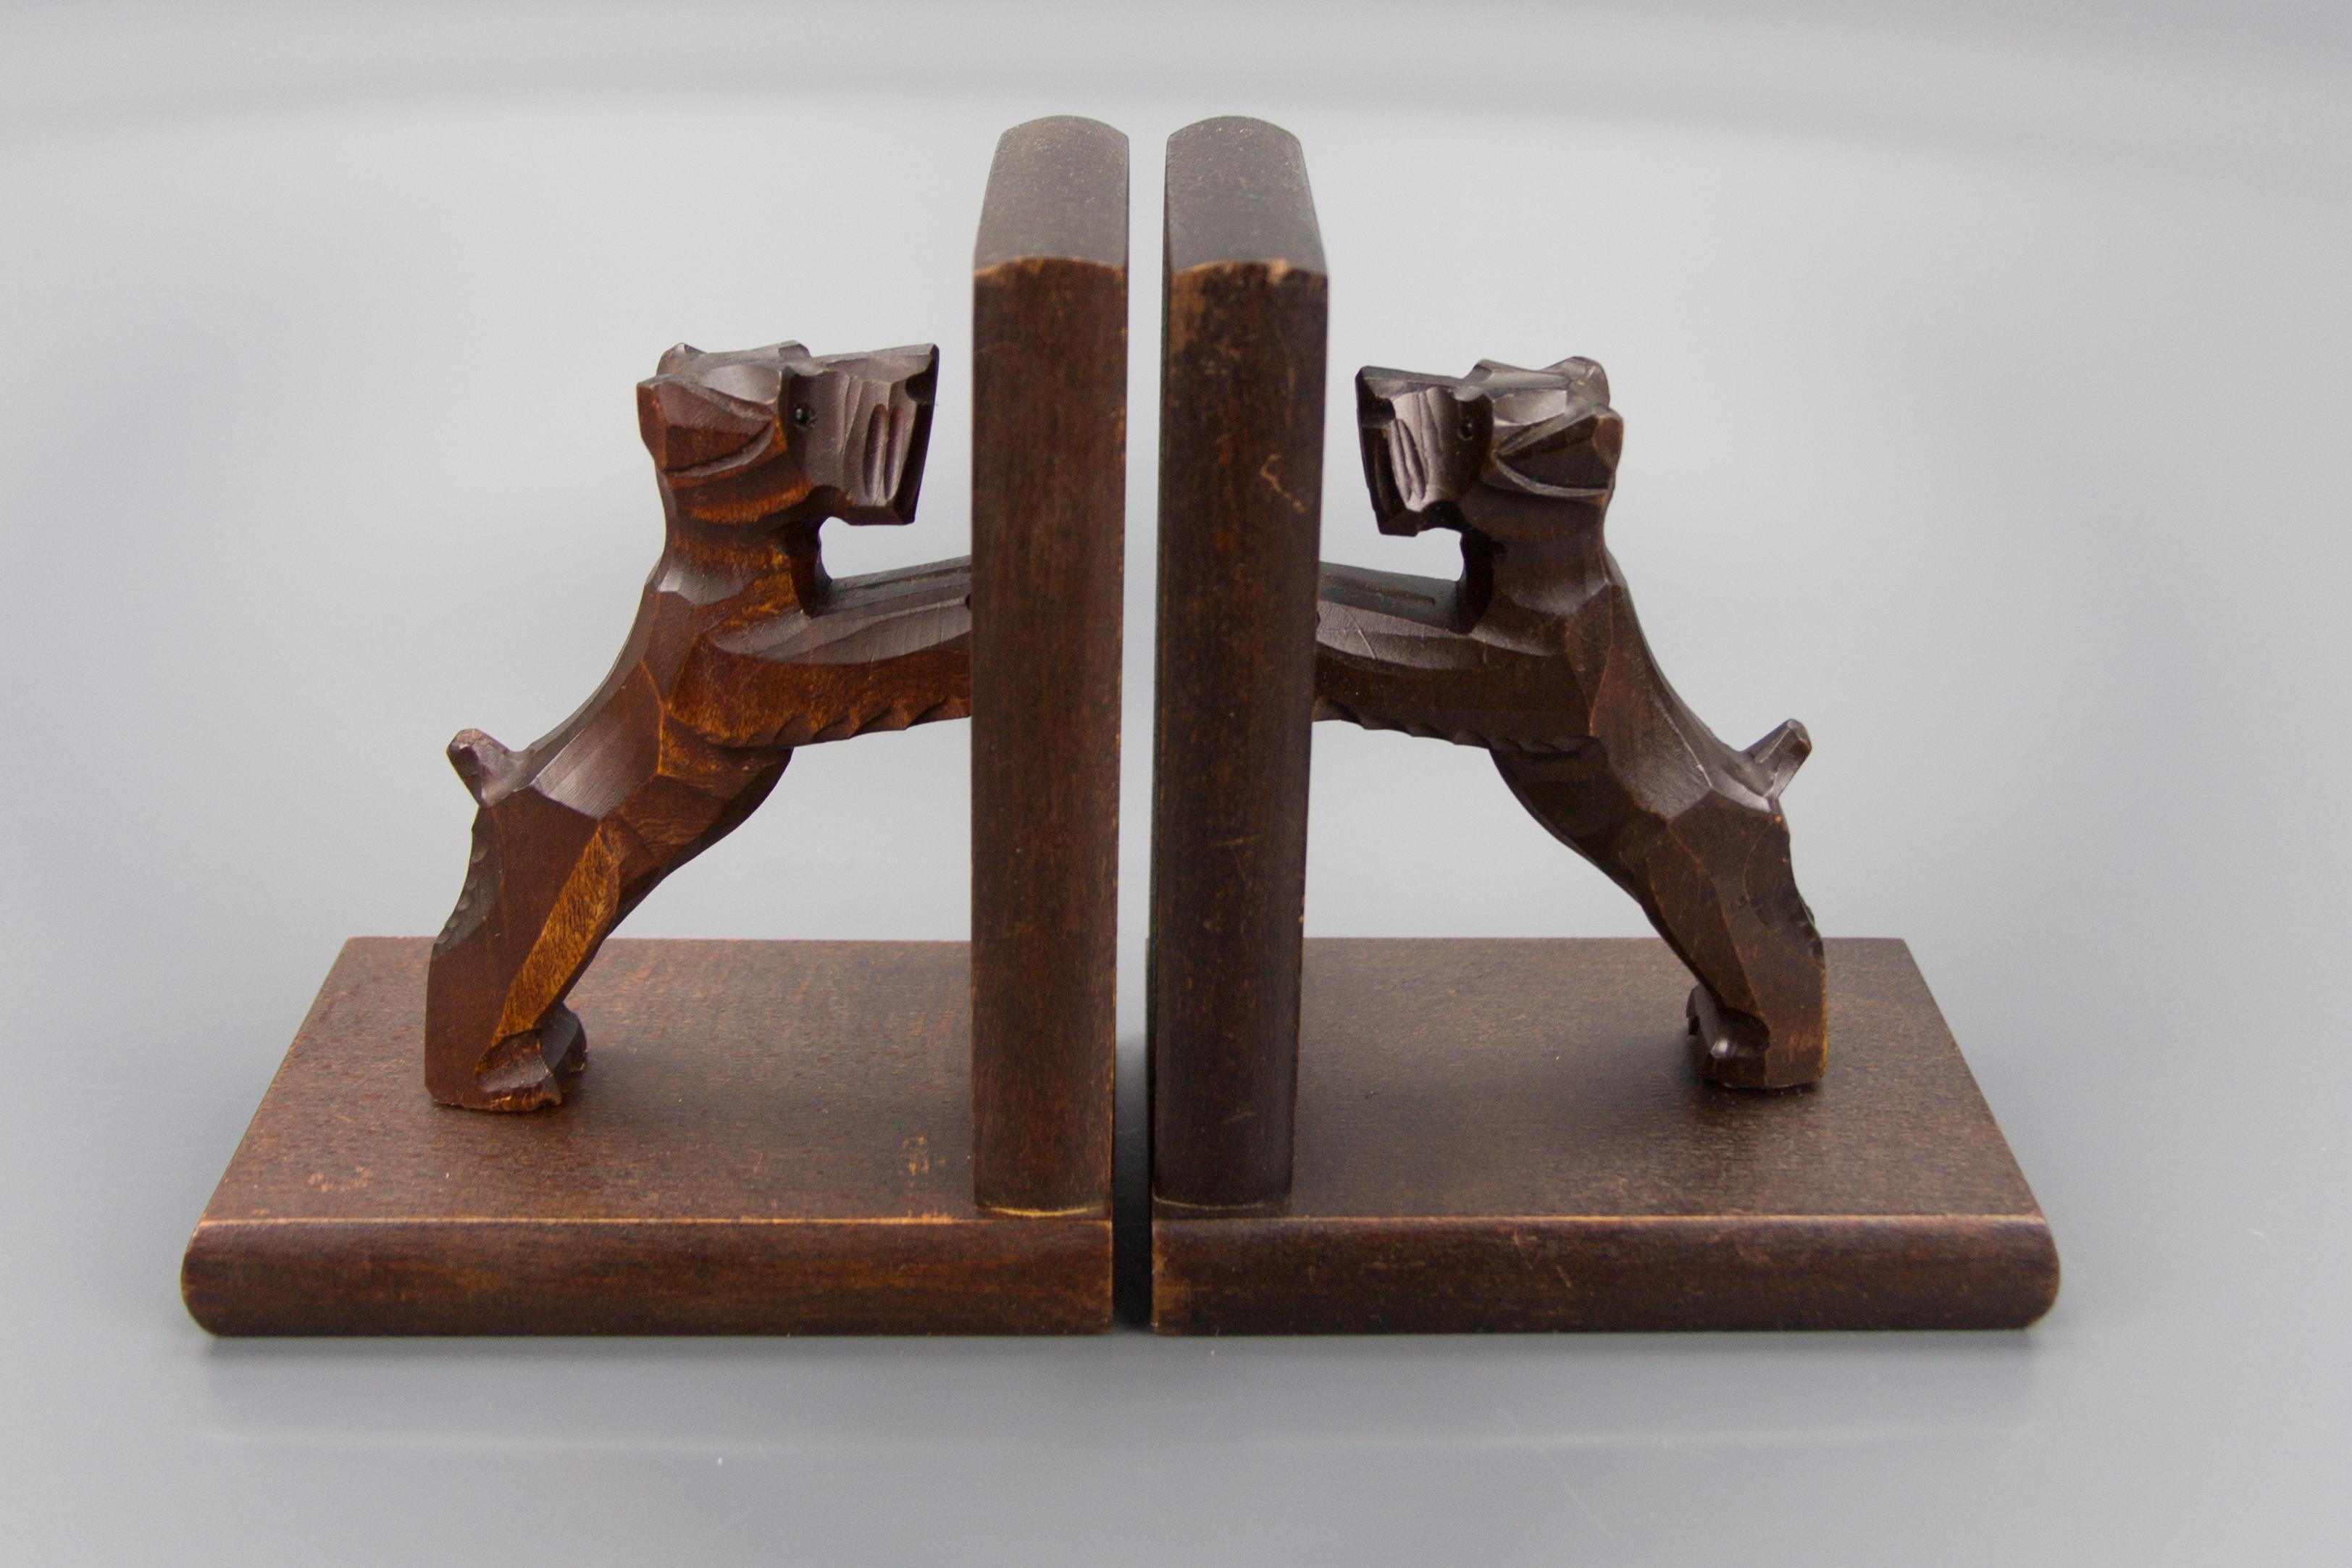 A charming pair of wooden bookends with carved figurines of Scottie dog terriers by Dörsch Oberweid, Germany, 1950s.
These adorable bookends will make a wonderful accent on a bookshelf, mantel, or console table. Ideal gift for any dog lover and/or